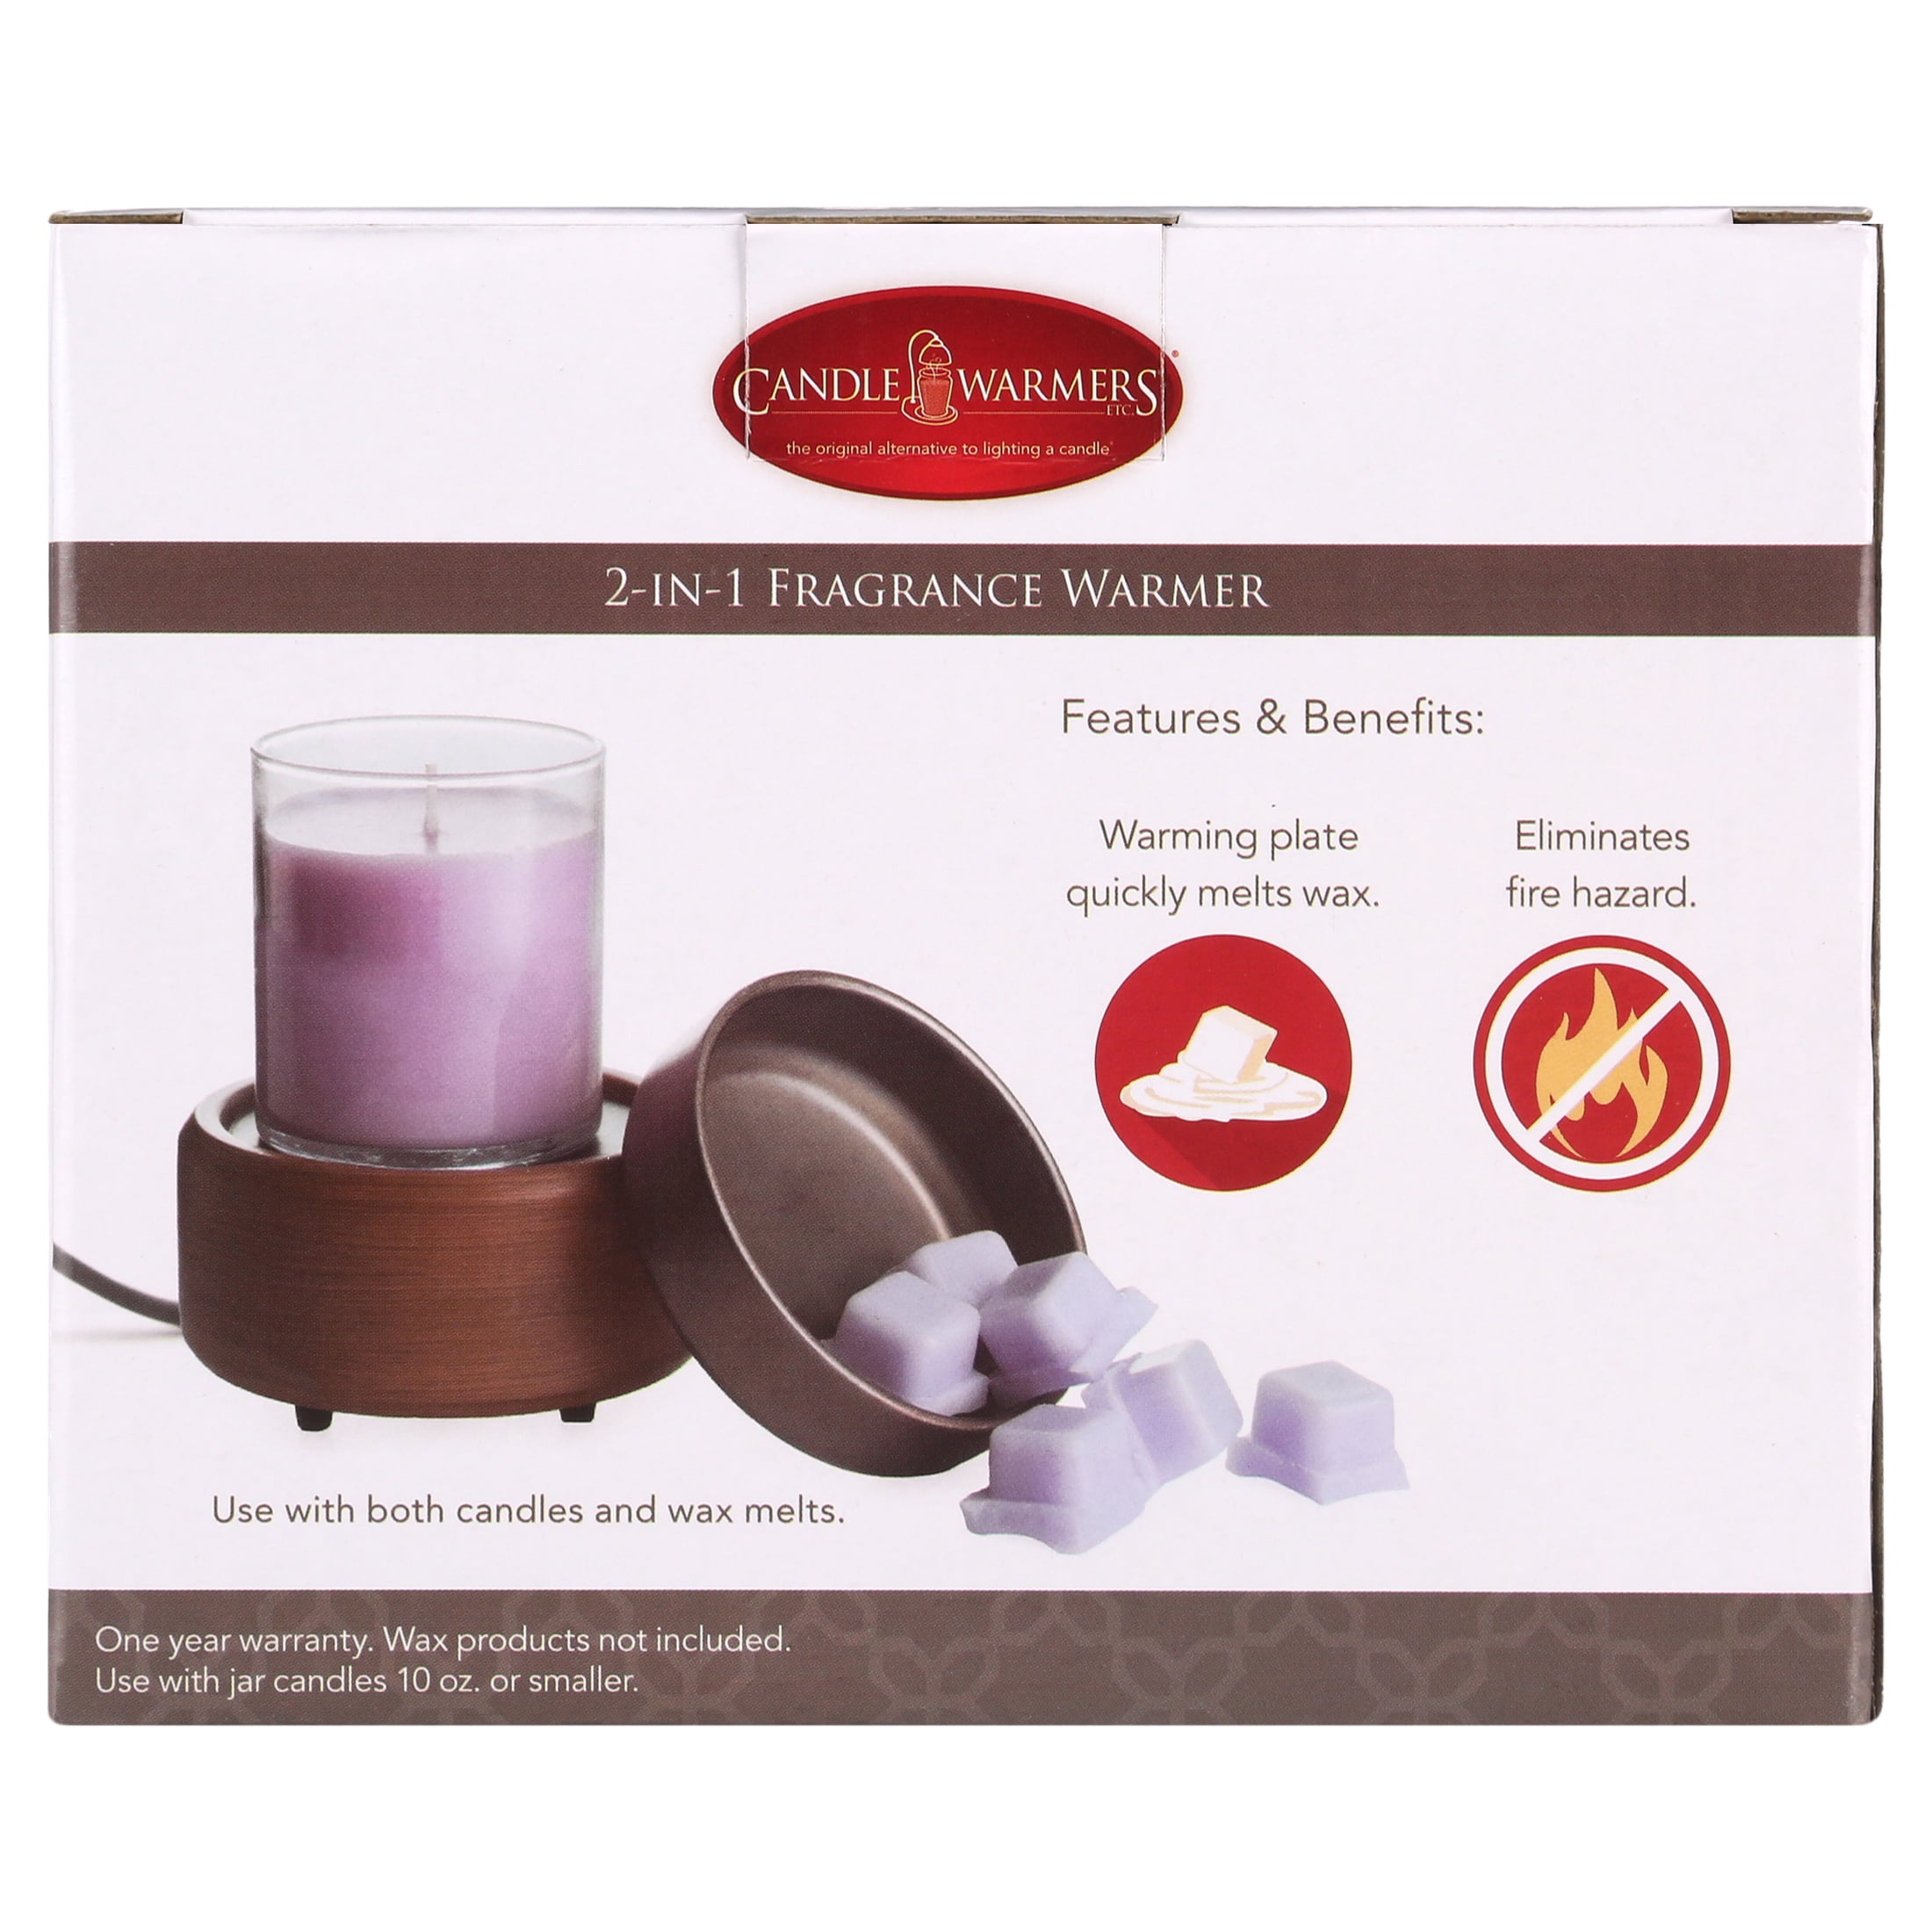 NEW Candle Warmers 2 in1 Fragrance Warmer Use with jar candles 10 oz or smaller 